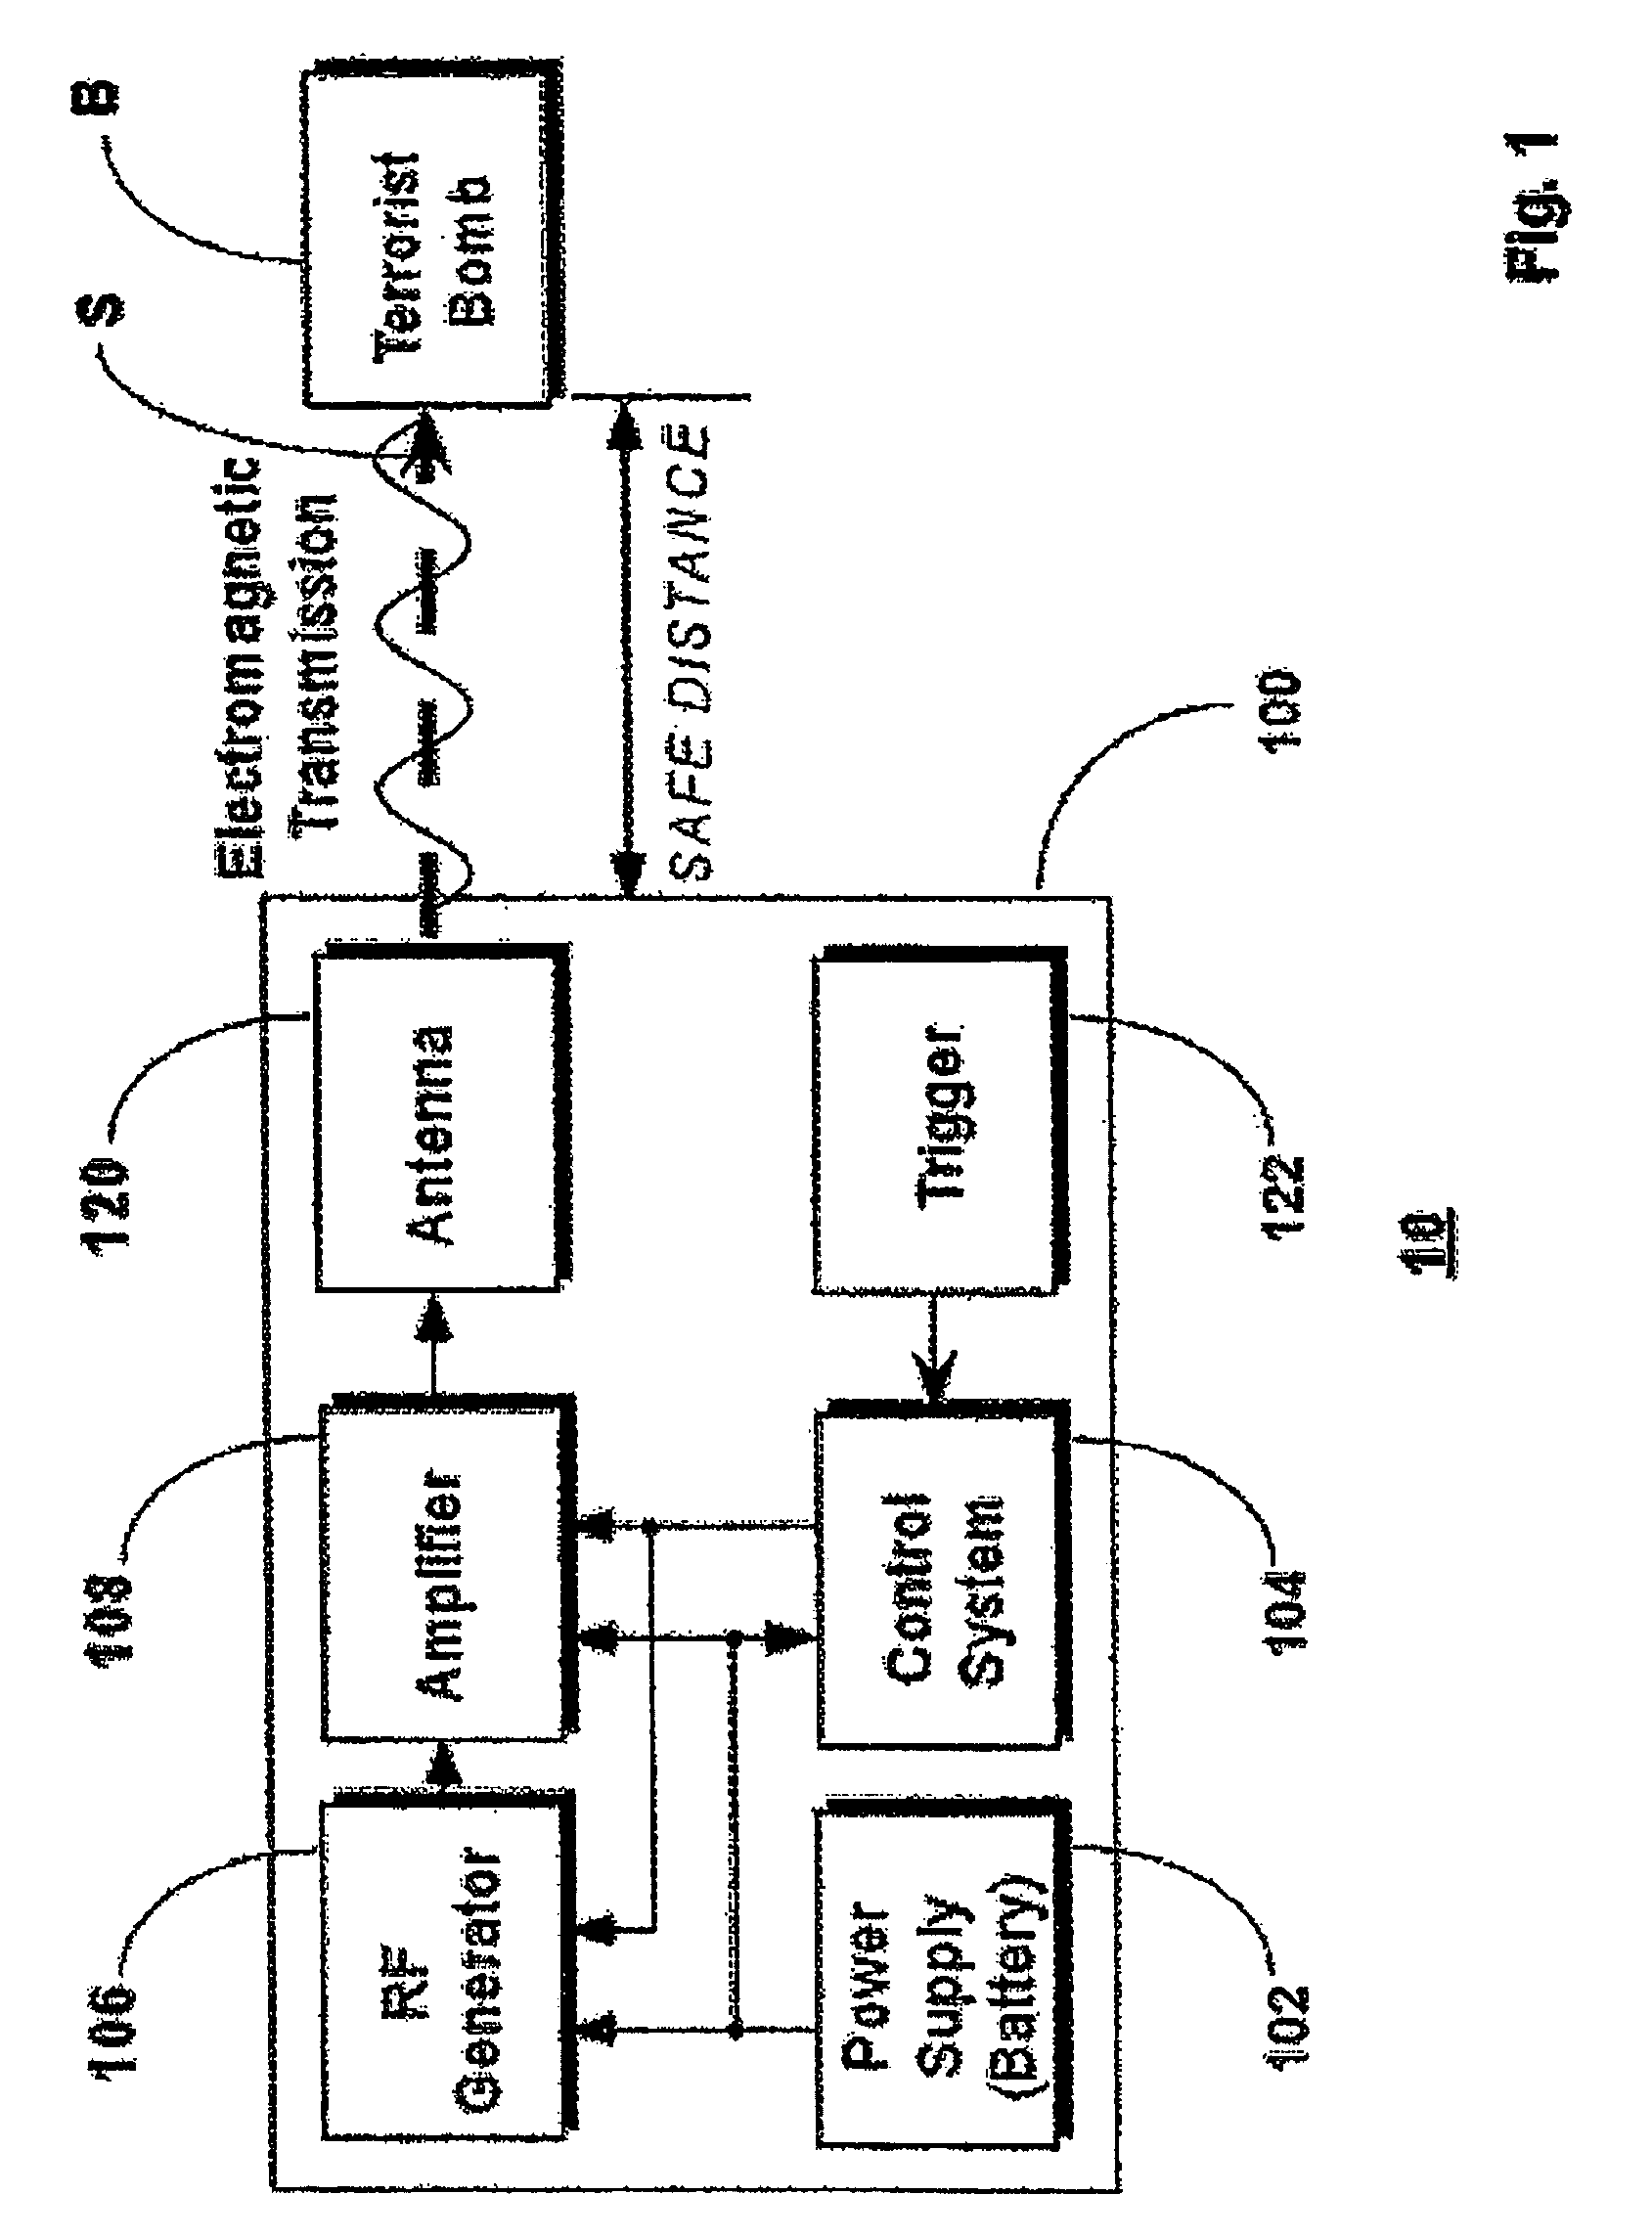 System and method for destabilizing improvised explosive devices